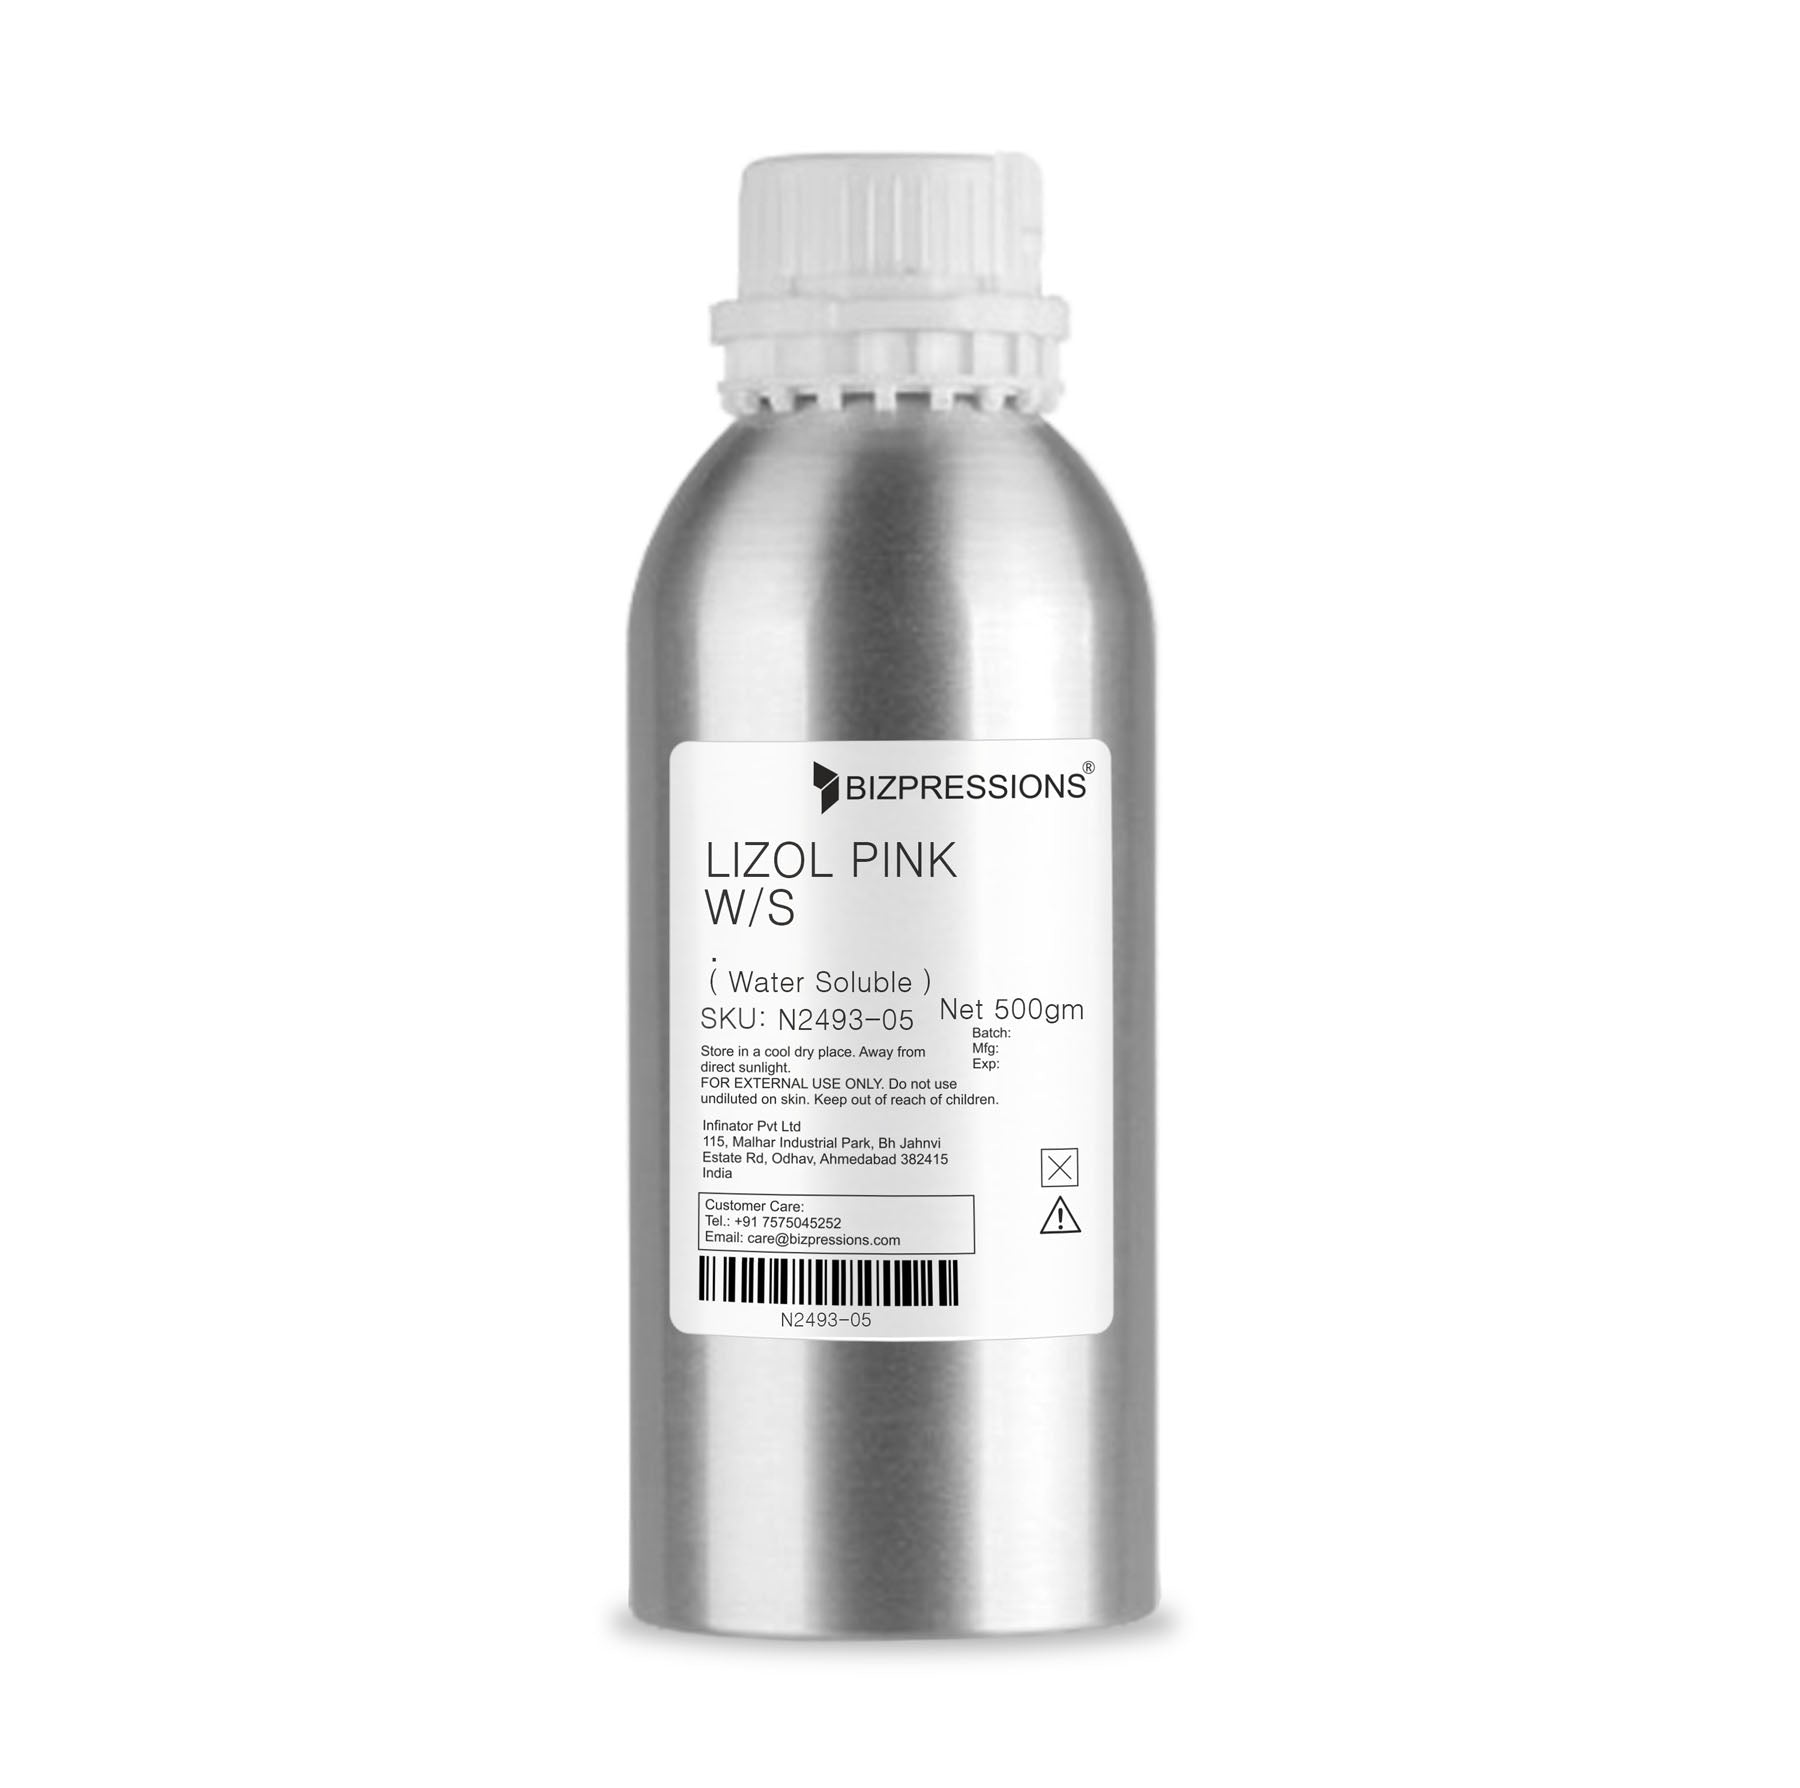 LIZOL PINK - Fragrance ( Water Soluble ) - 500 gm